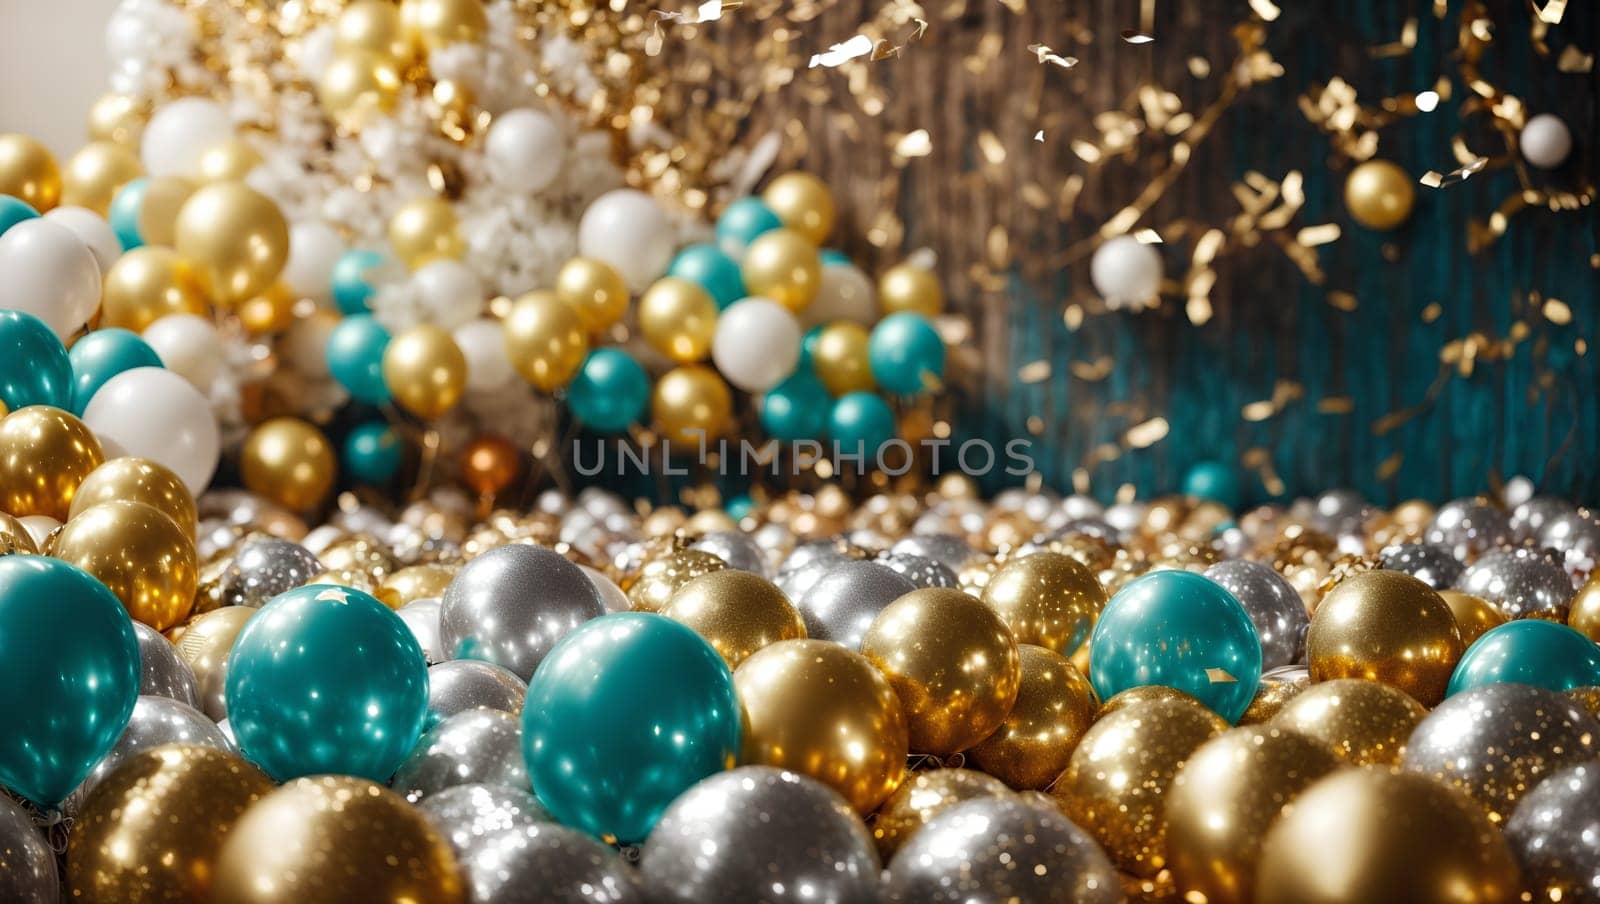 bouquet of gold and silver balloons with confetti, by Севостьянов